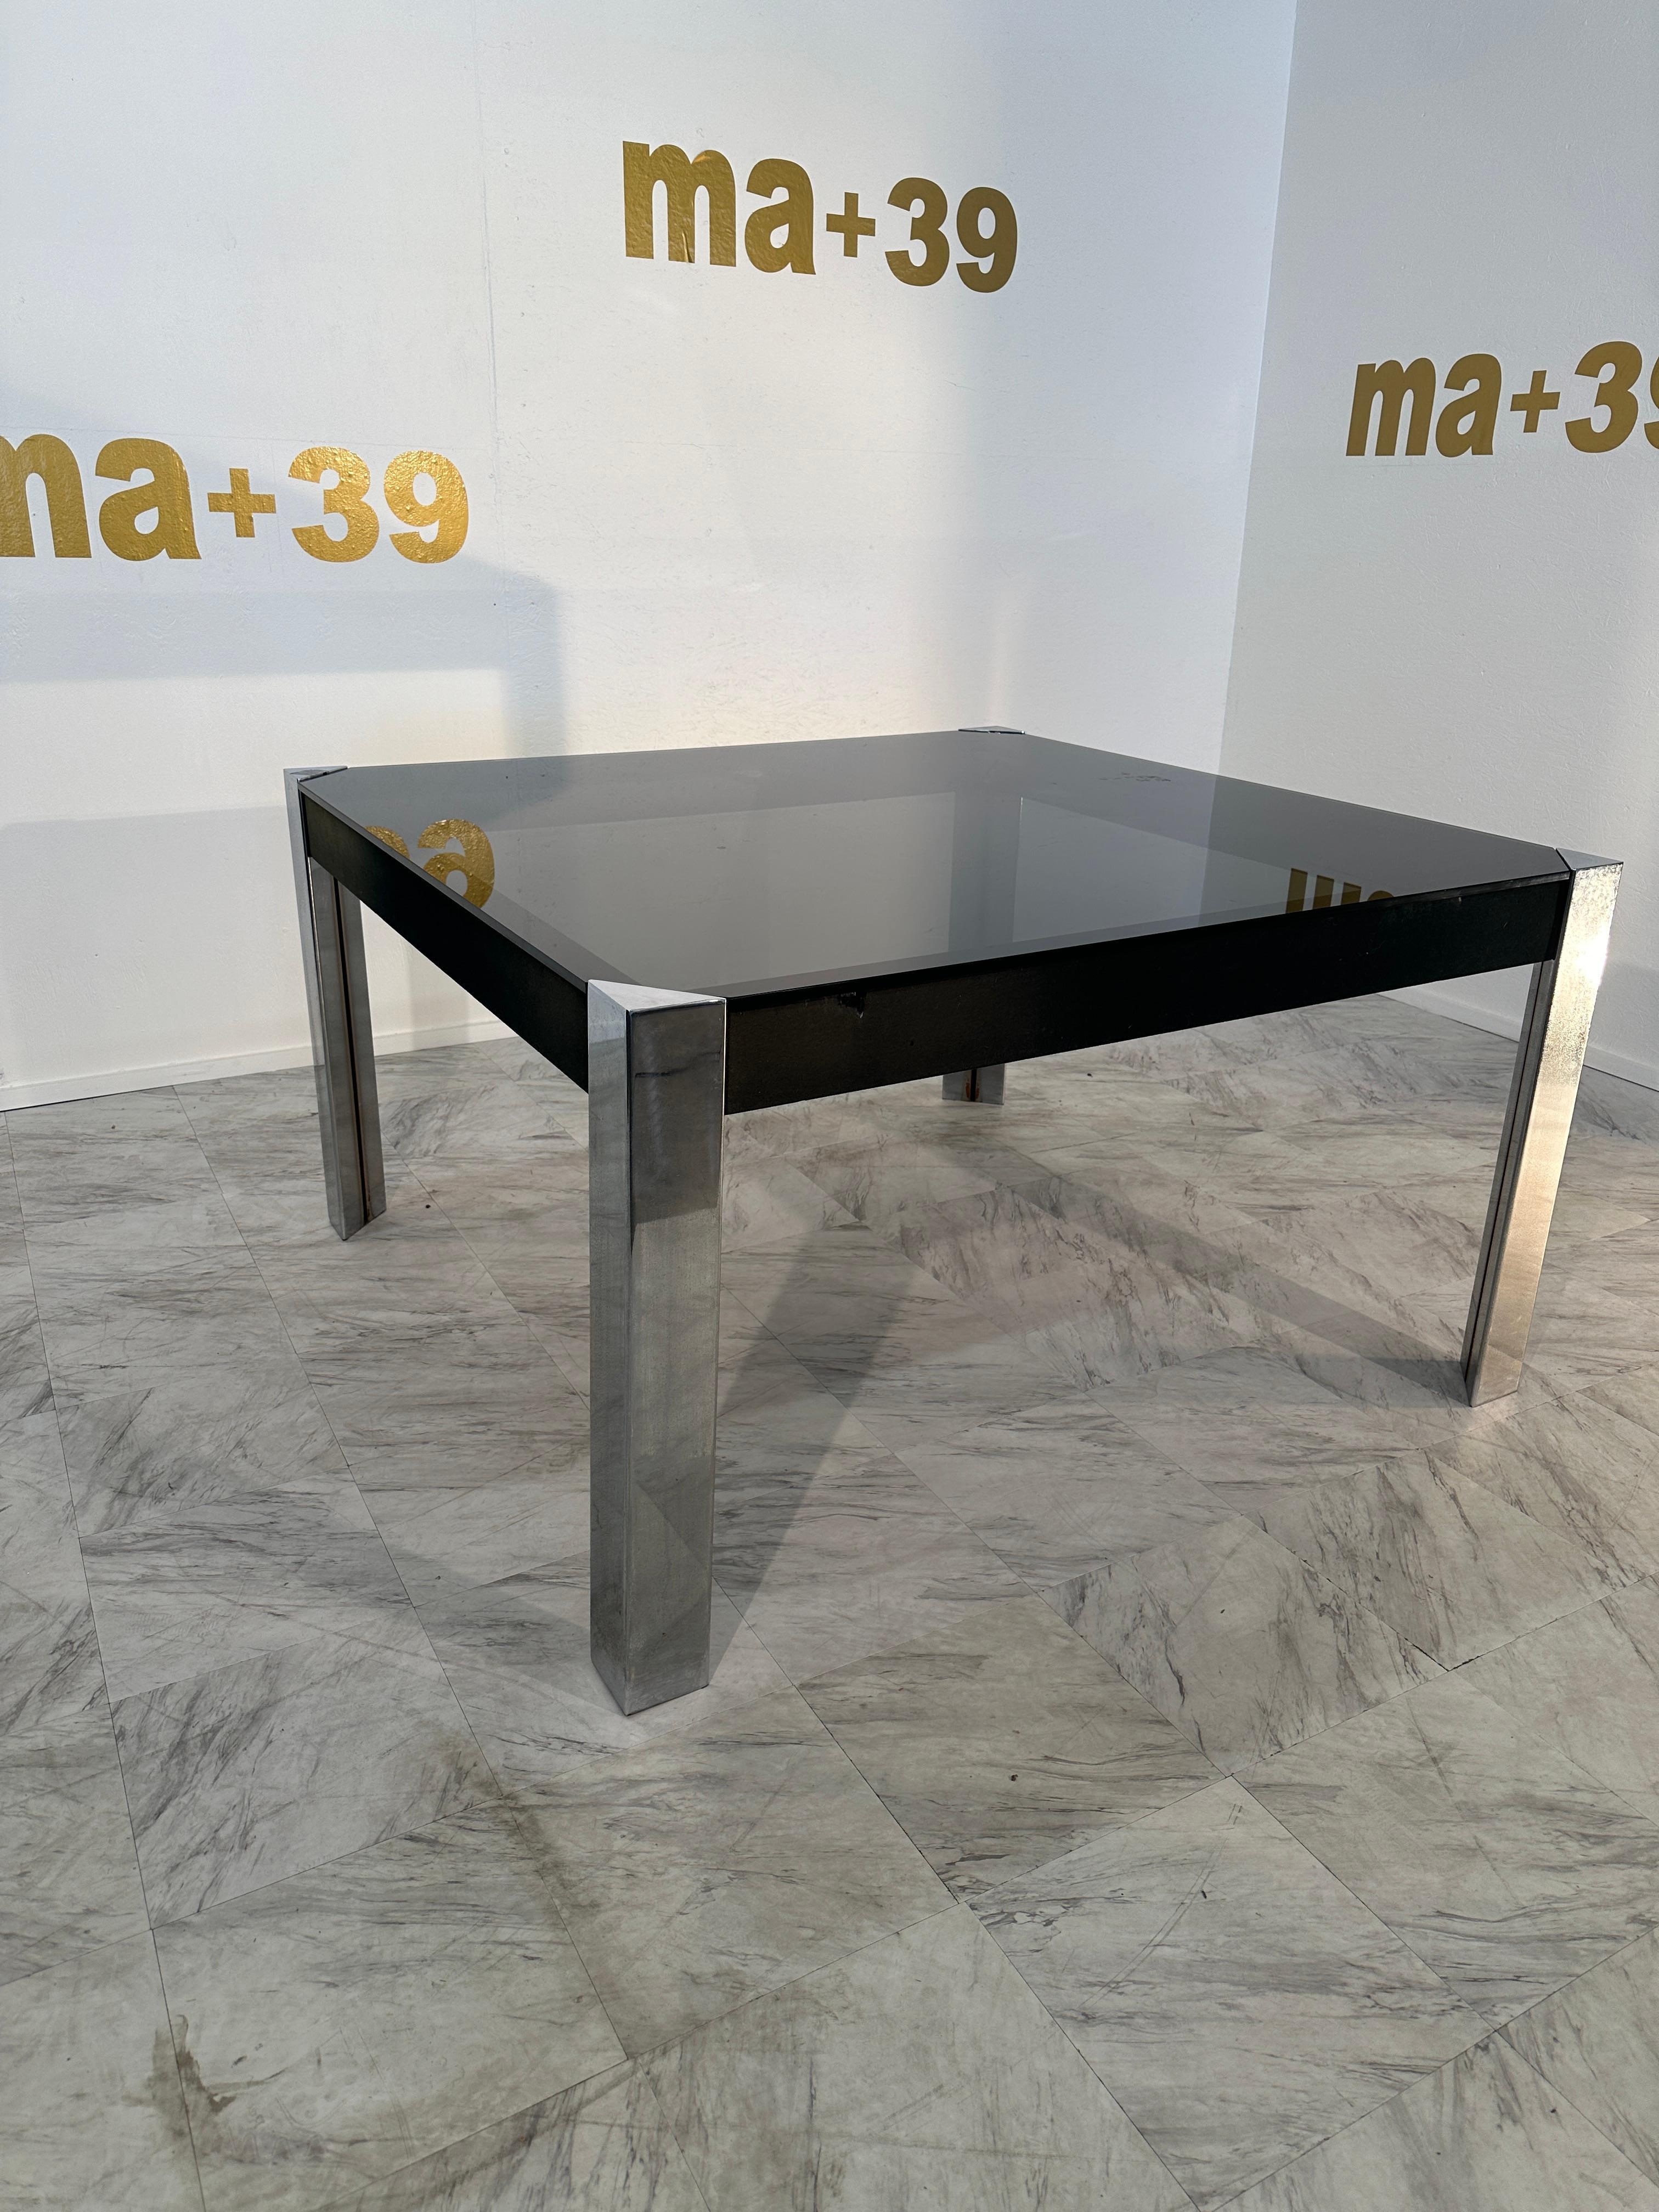 The Vintage Italian Chrome and Glass Dining Table by Guido Faleschini X Hermes features a distinctive design with a chrome base and an obscured black glass top. This piece reflects a blend of Italian craftsmanship and luxury, showcasing a stylish